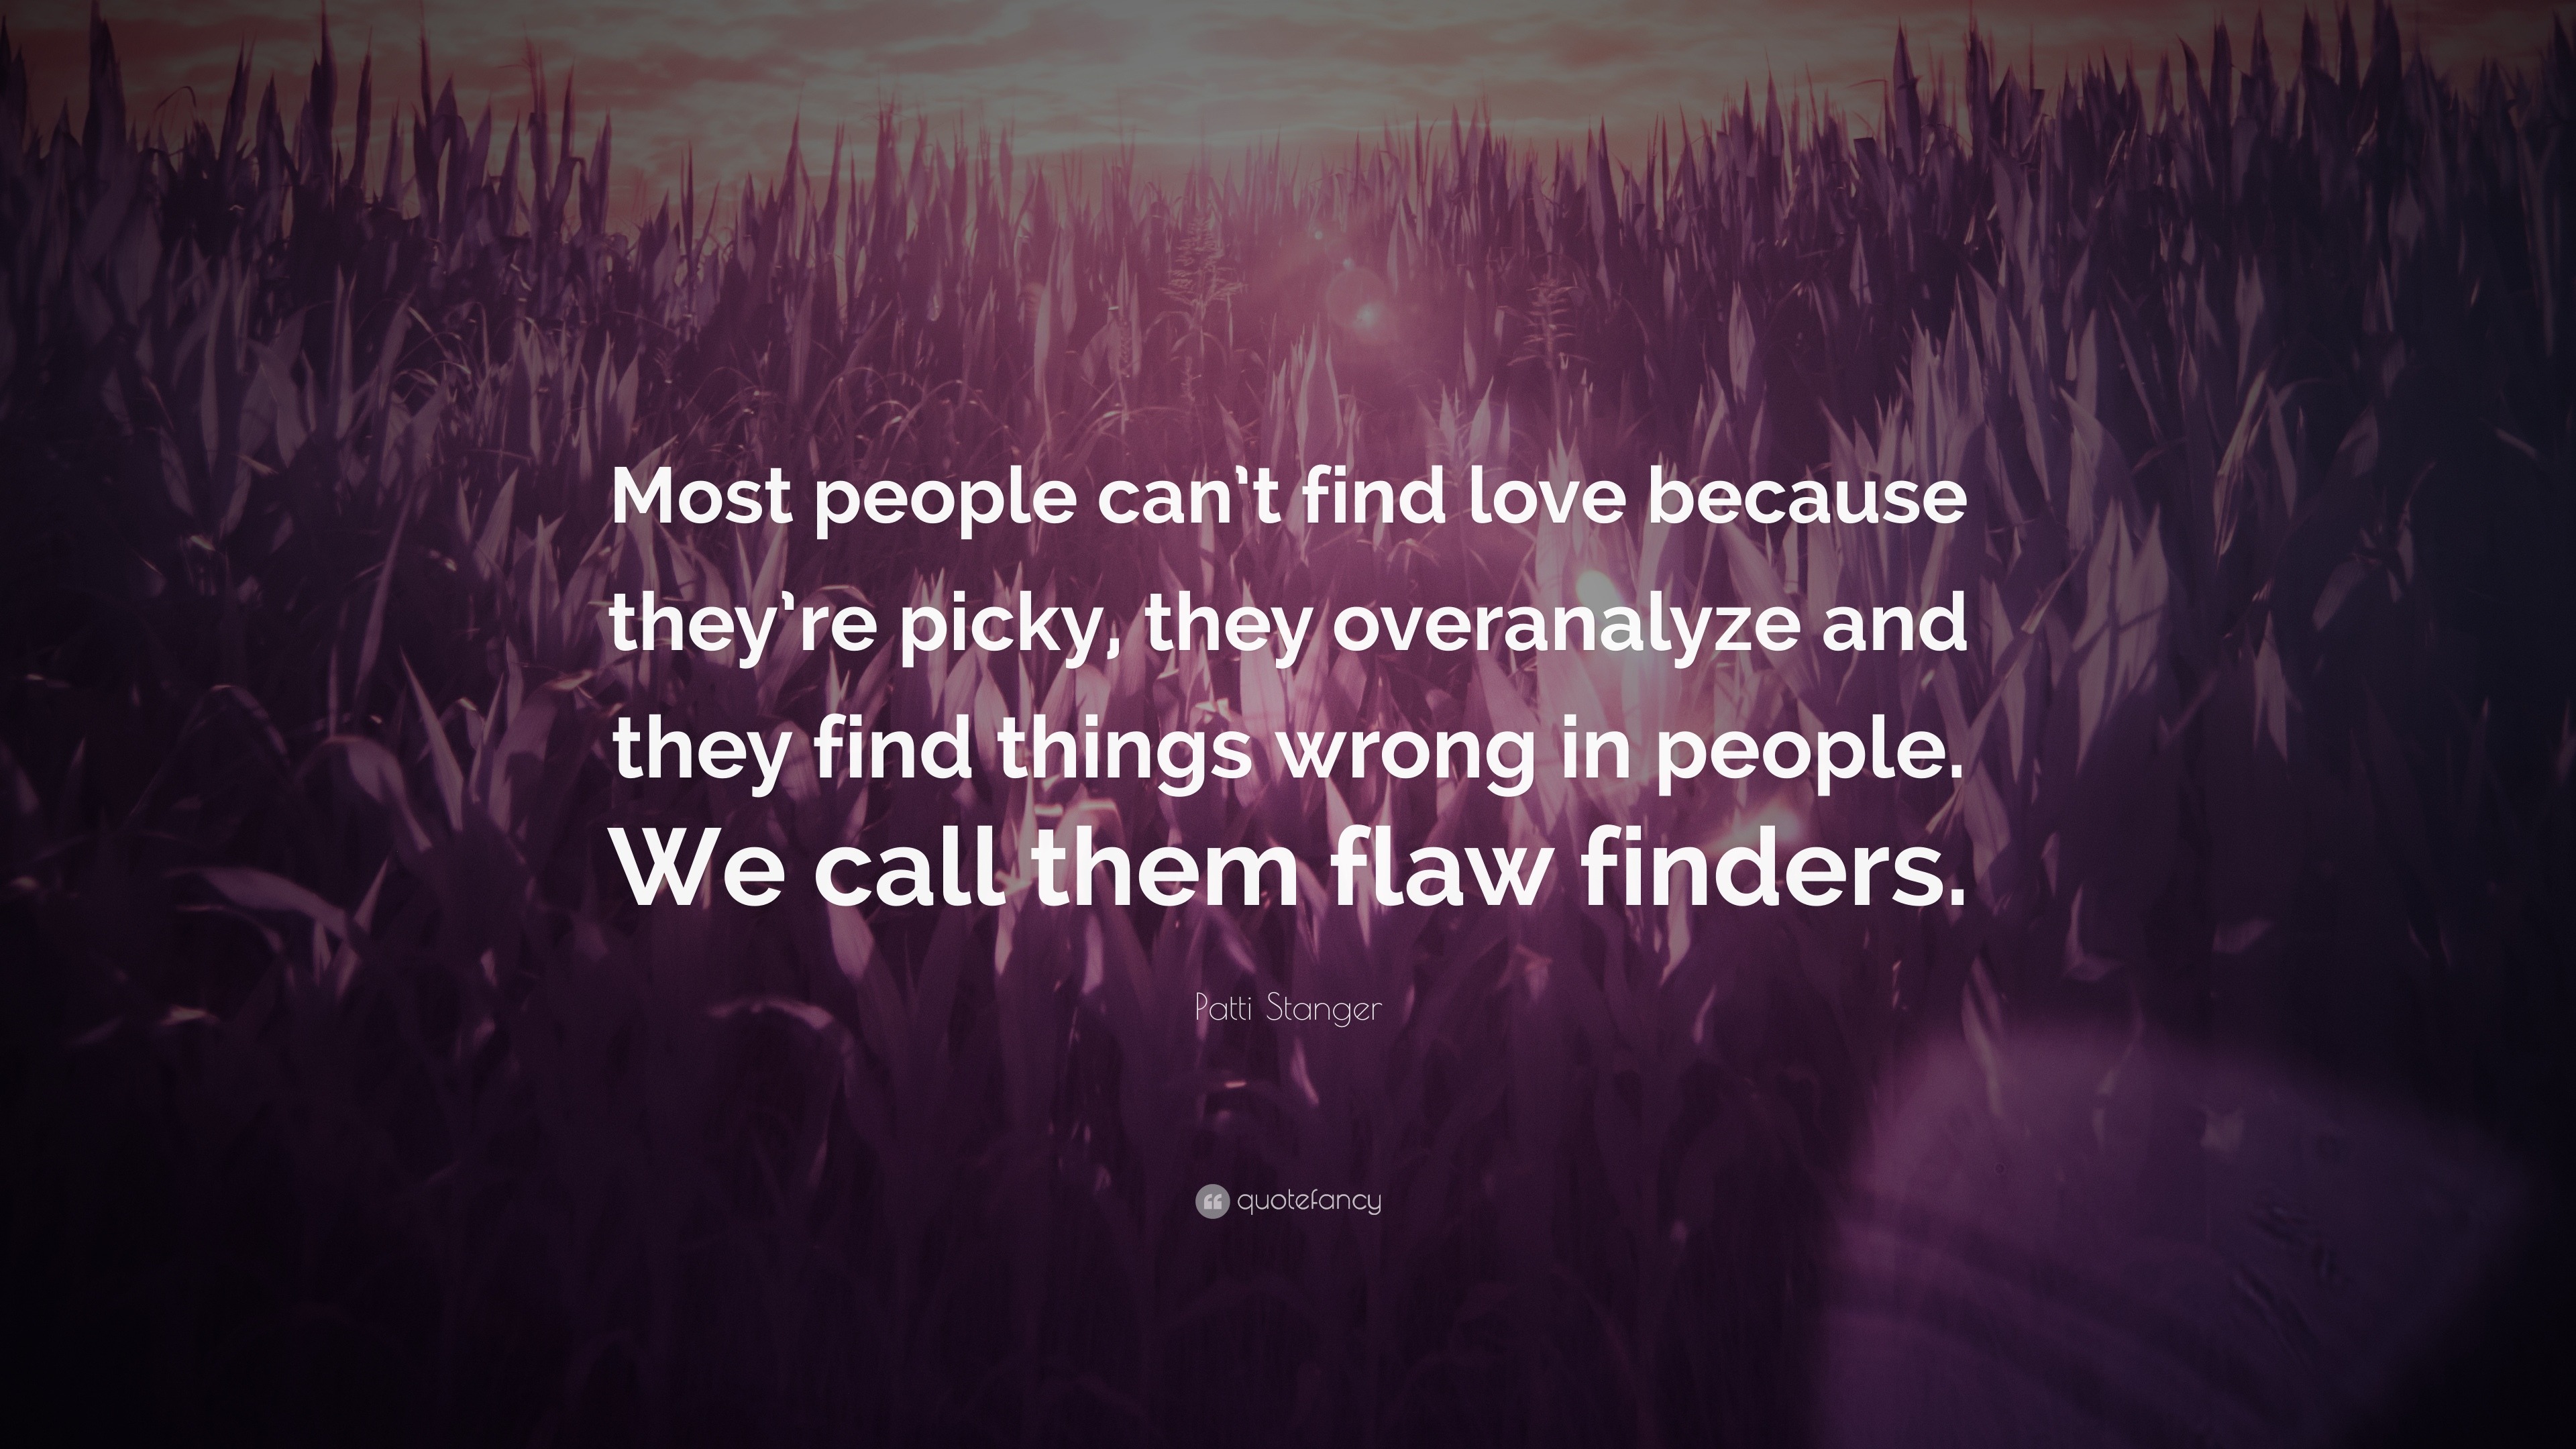 Patti Stanger Quote “Most people can t find love because they re